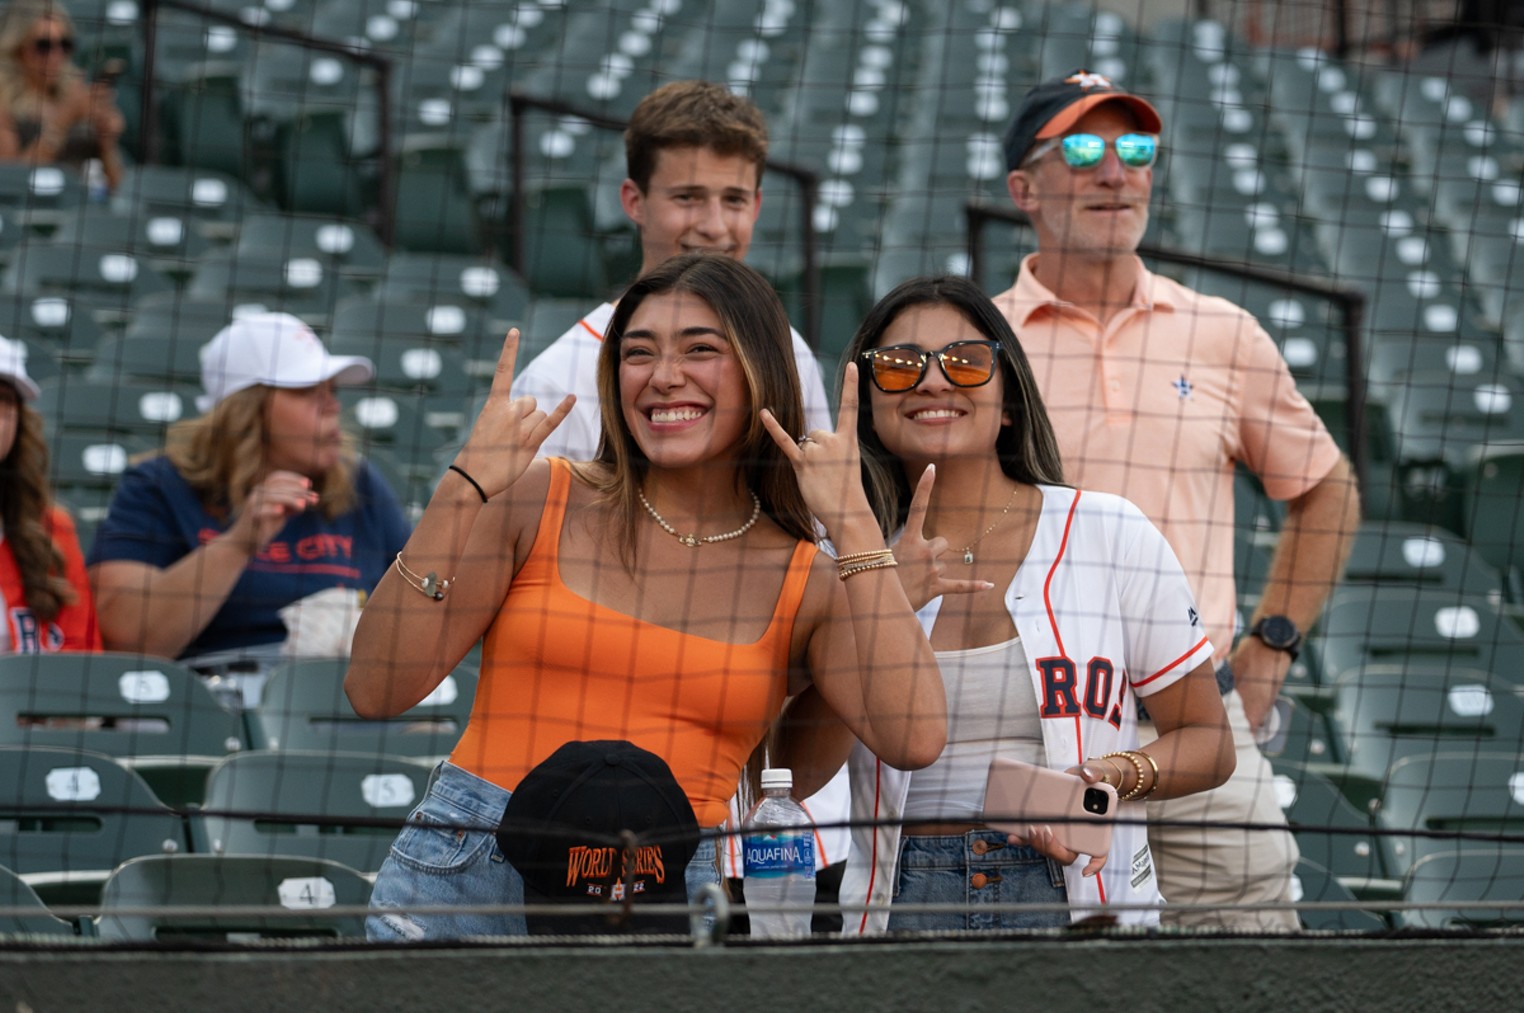 Astros Fans Make the Trip to Orioles Park at Camden Yards, Houston, Houston Press